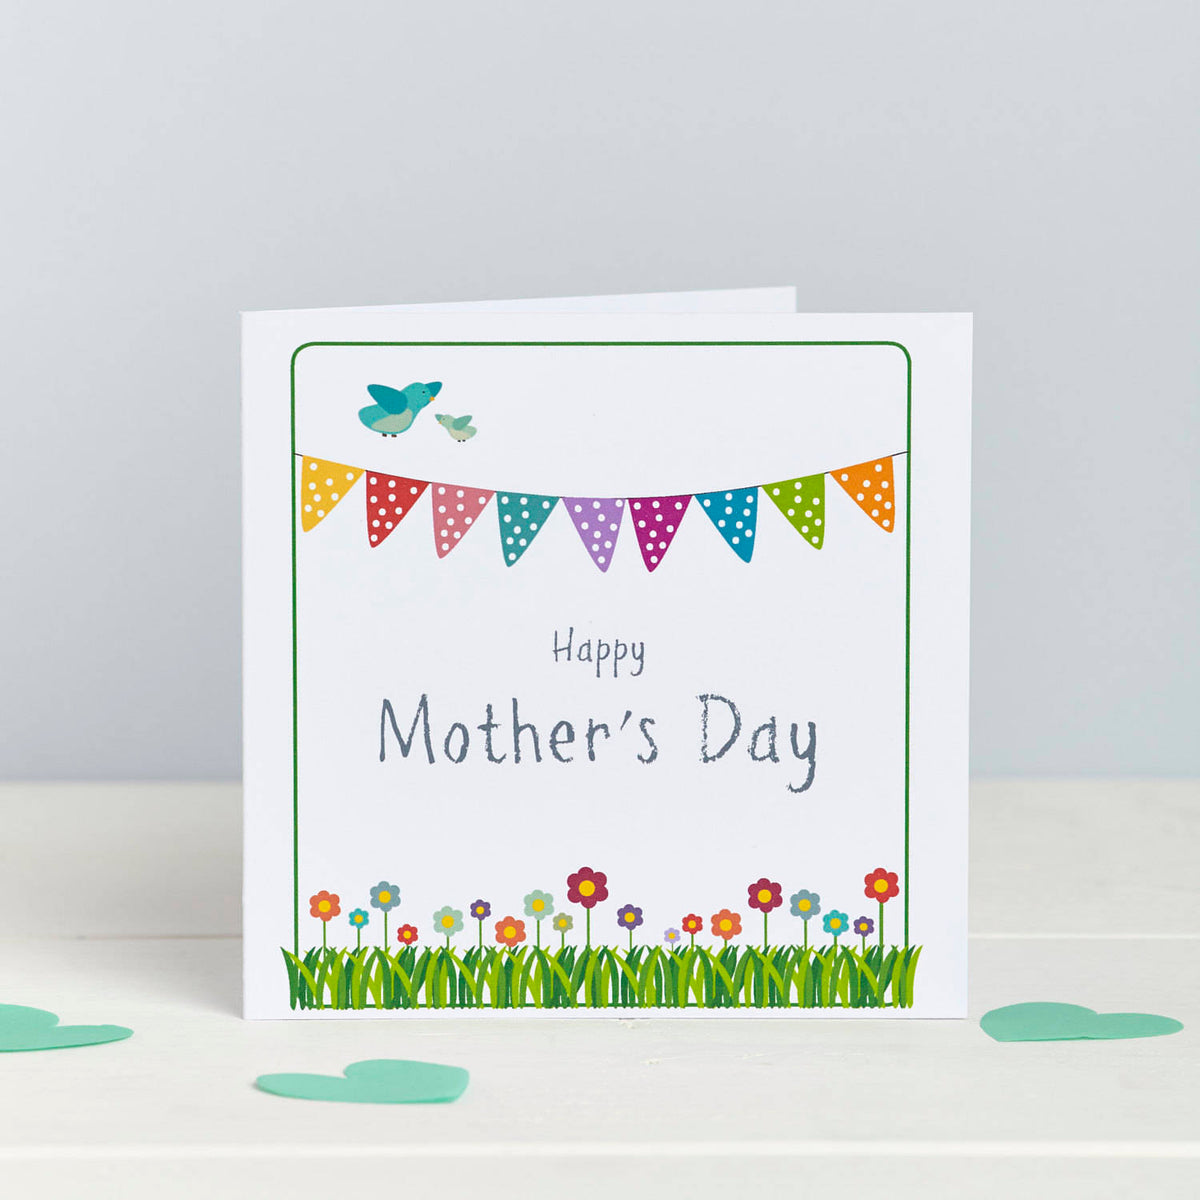 Eco Friendly Handmade Mother's Day Cards Flowers And Bees